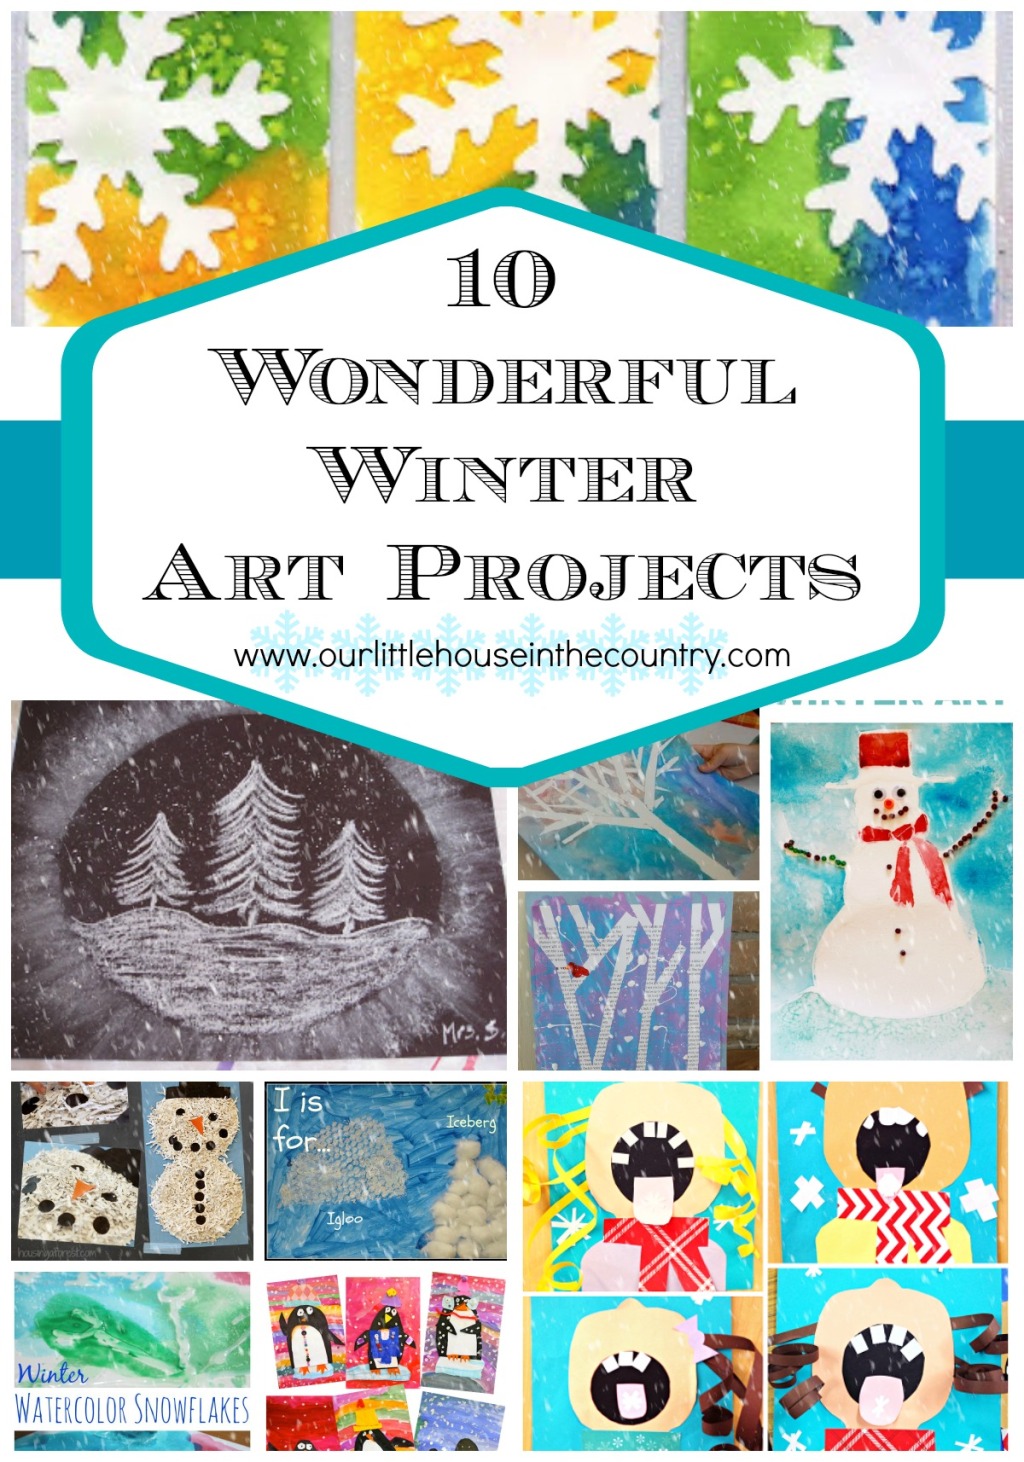 10 Wonderful Winter Art Projects for Kids - Our Little House in the Country